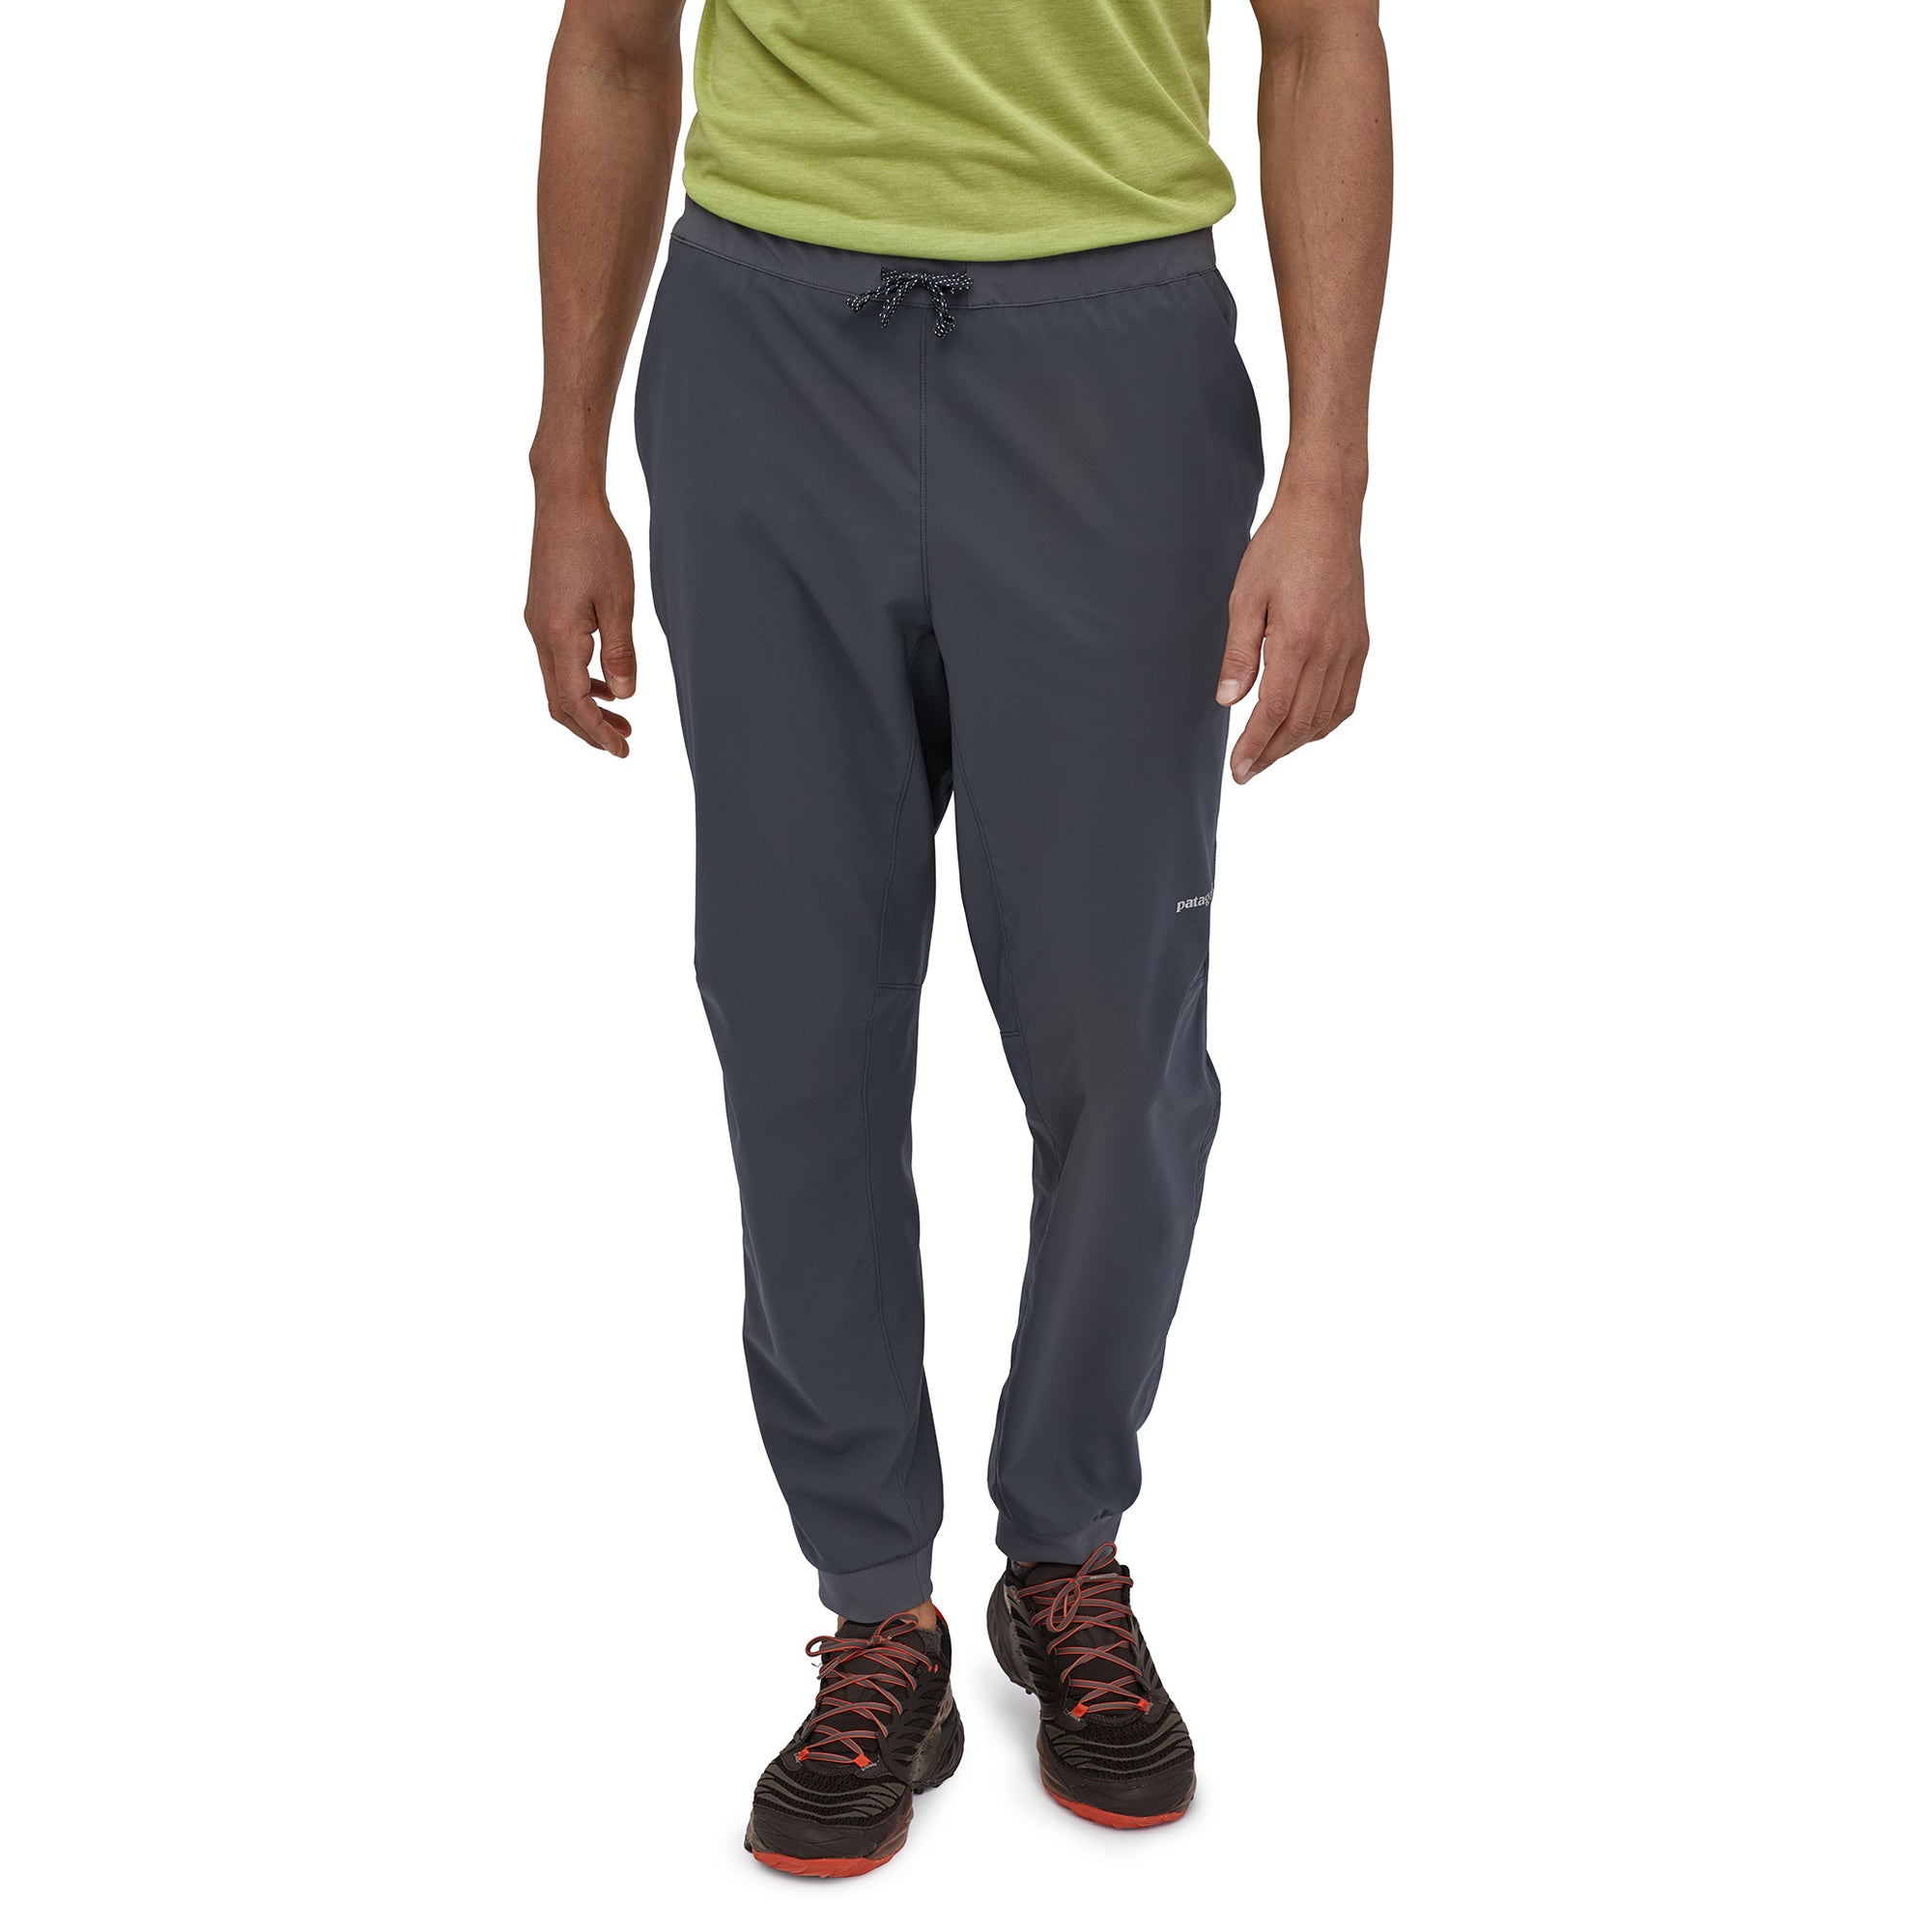 a model shows the front of the men's terrebone jogger pant